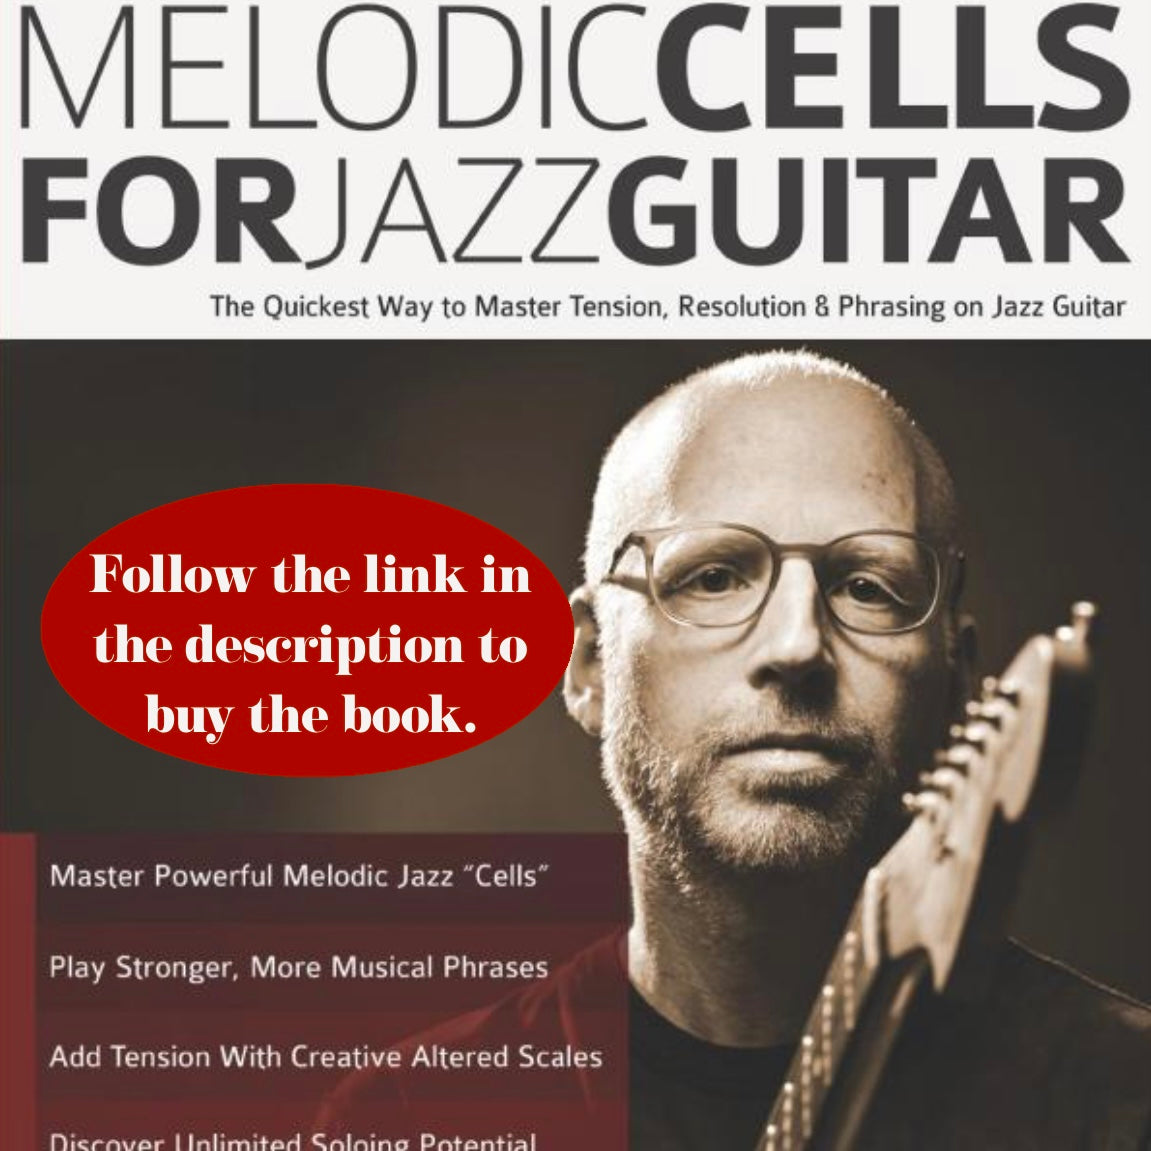 Oz Noy’s Melodic Cells for Jazz Guitar: follow the link in the description to buy the book